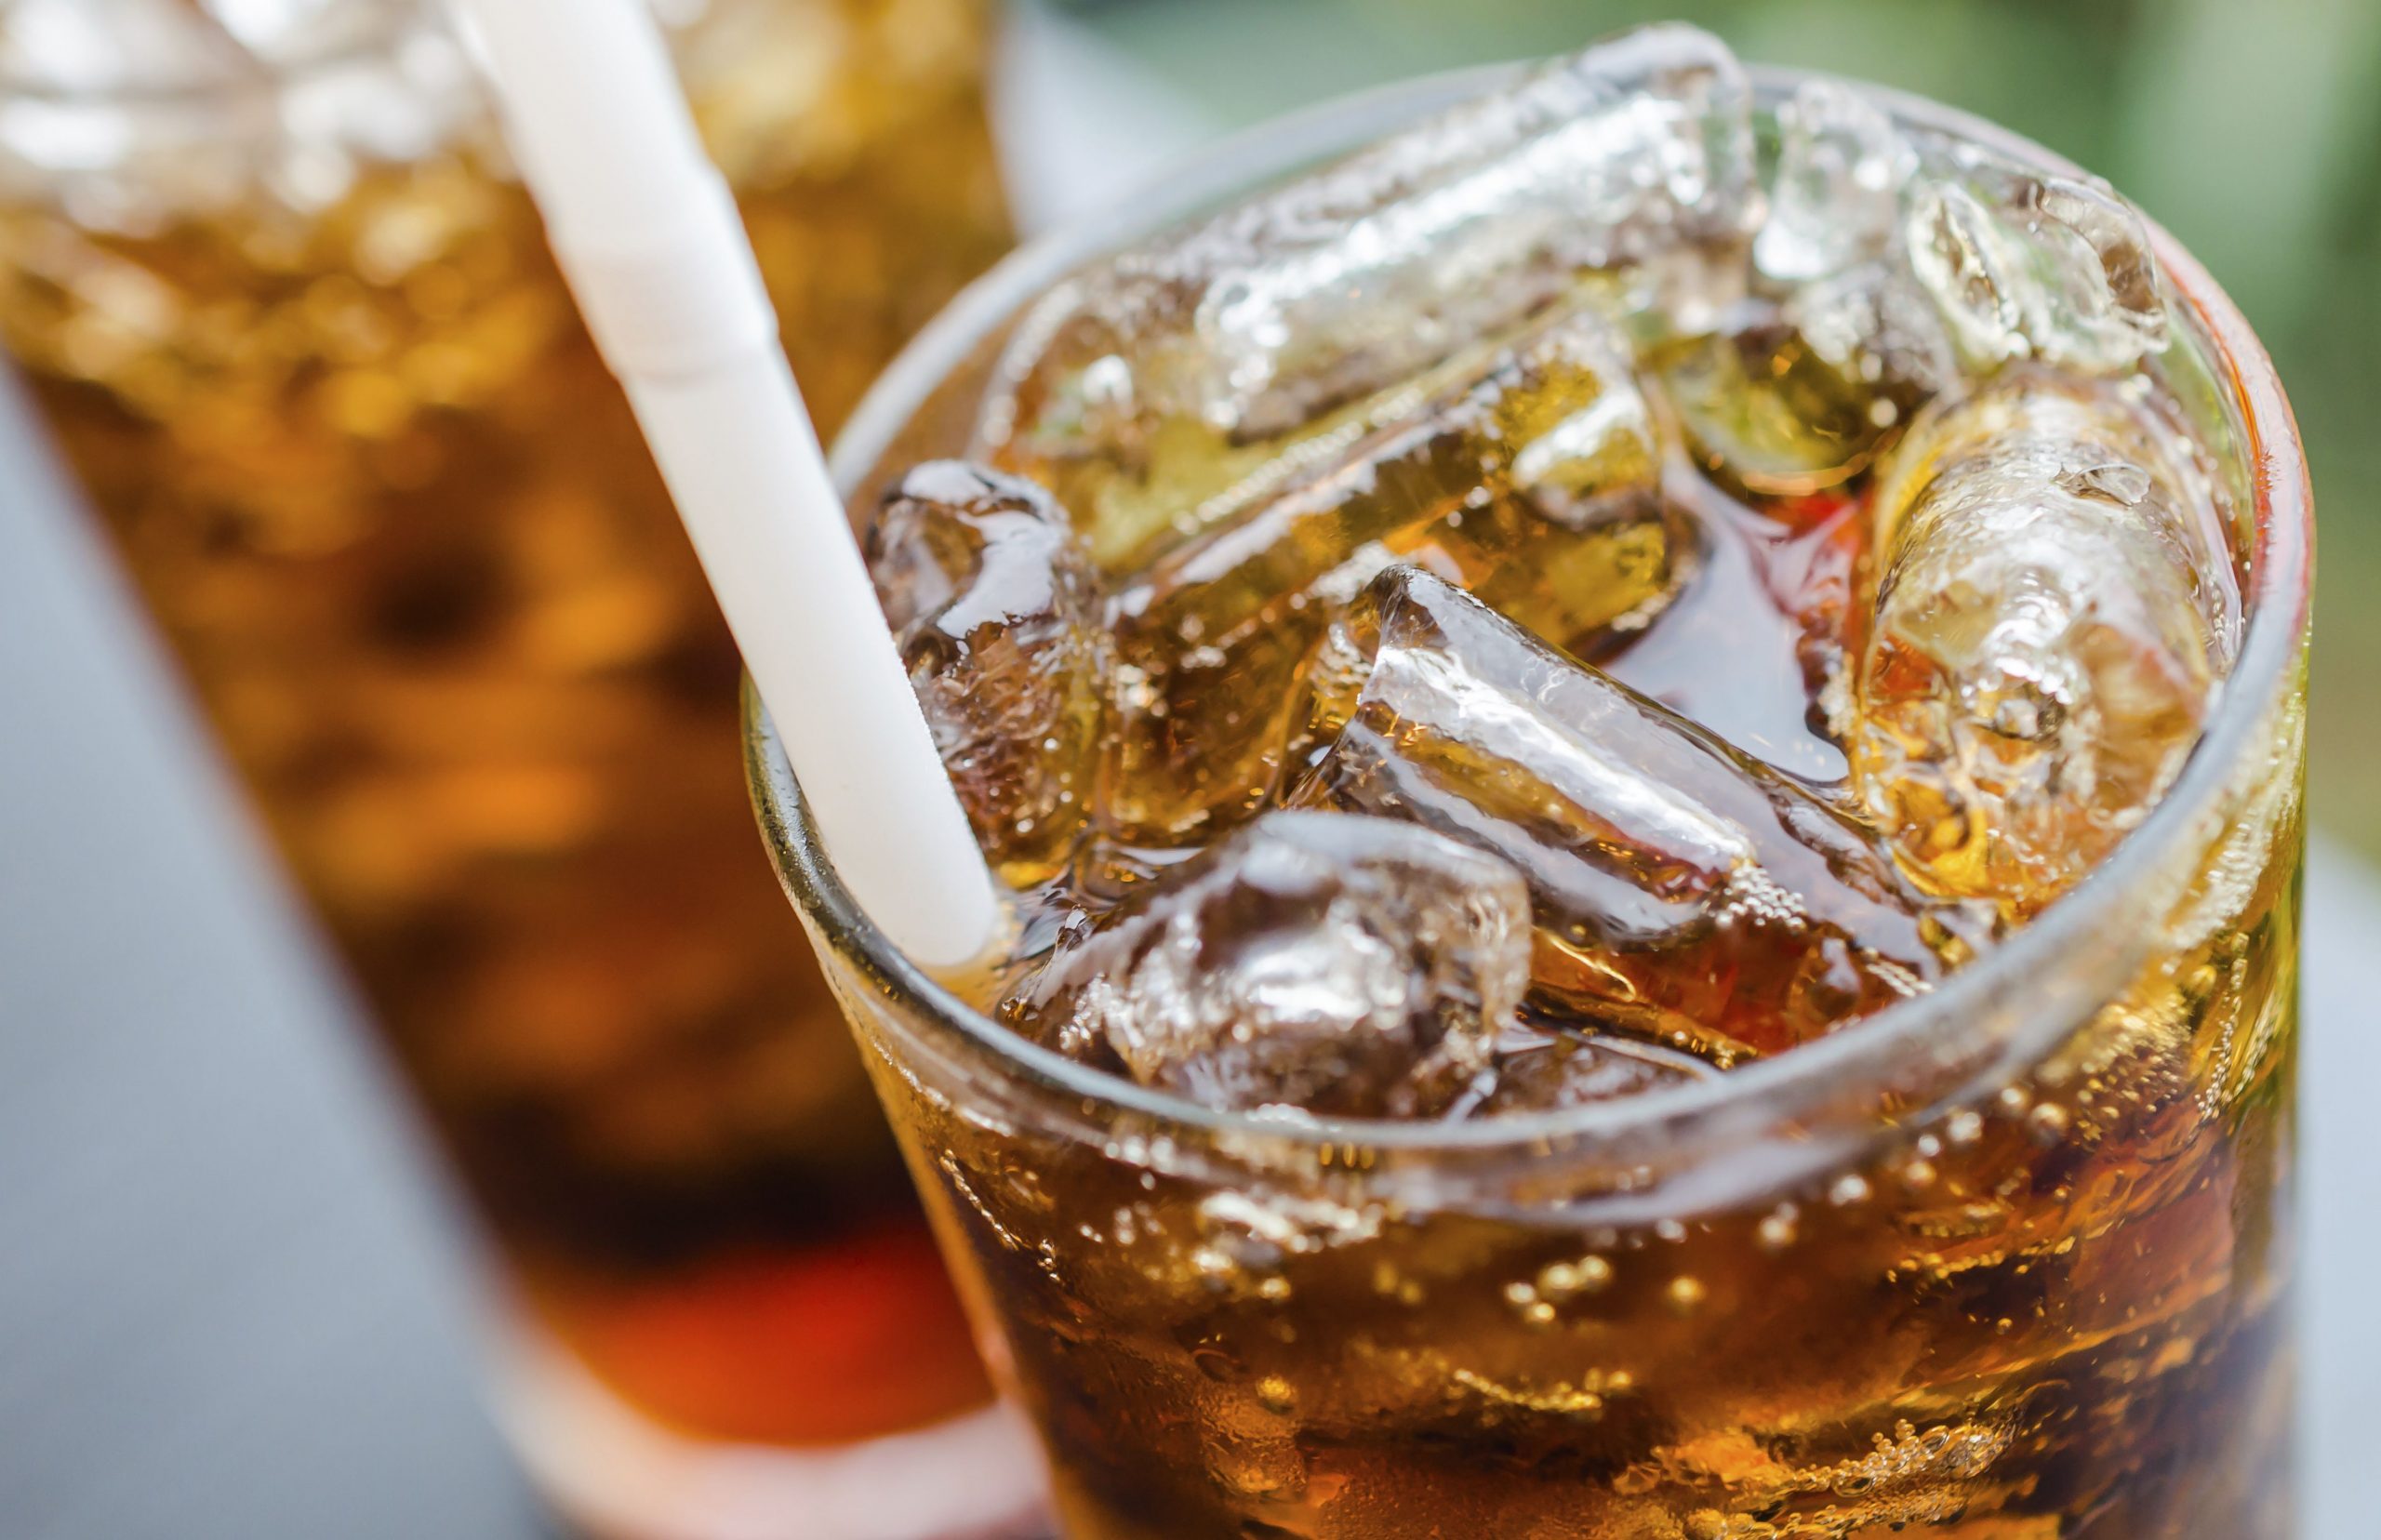 Does drinking soda cause kidney stones? If not, what does ...